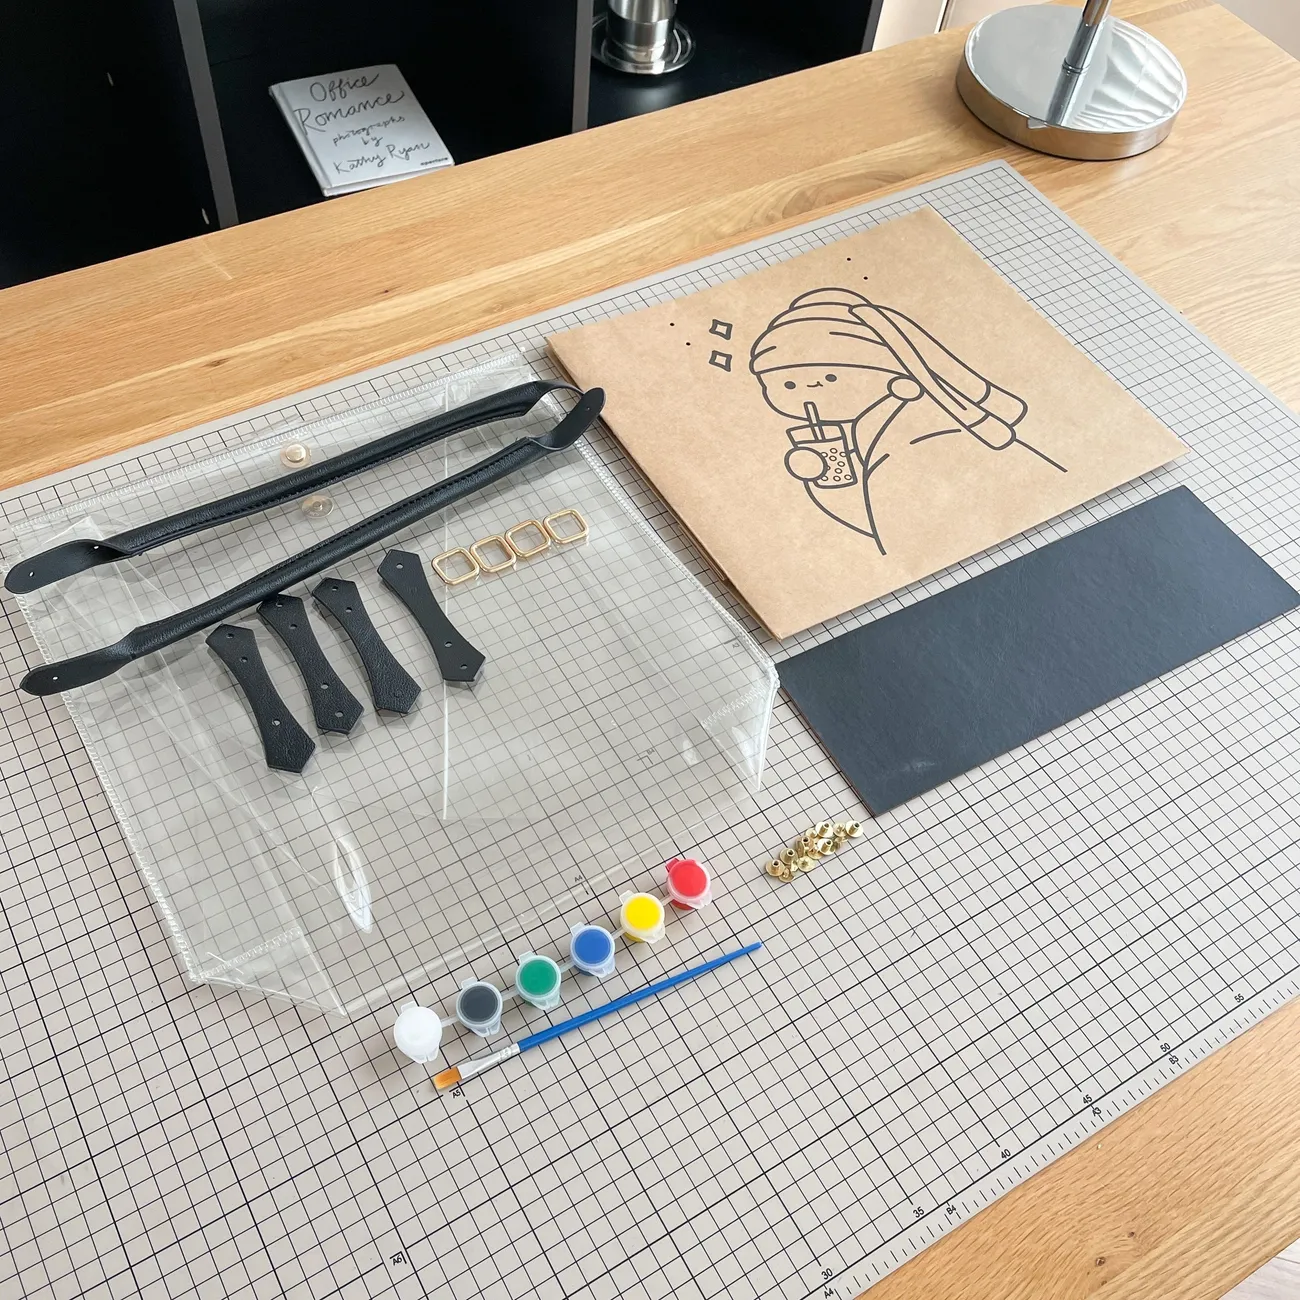 Create Your Own Unique Fashion Accessory Diy Craft Purse Kit For